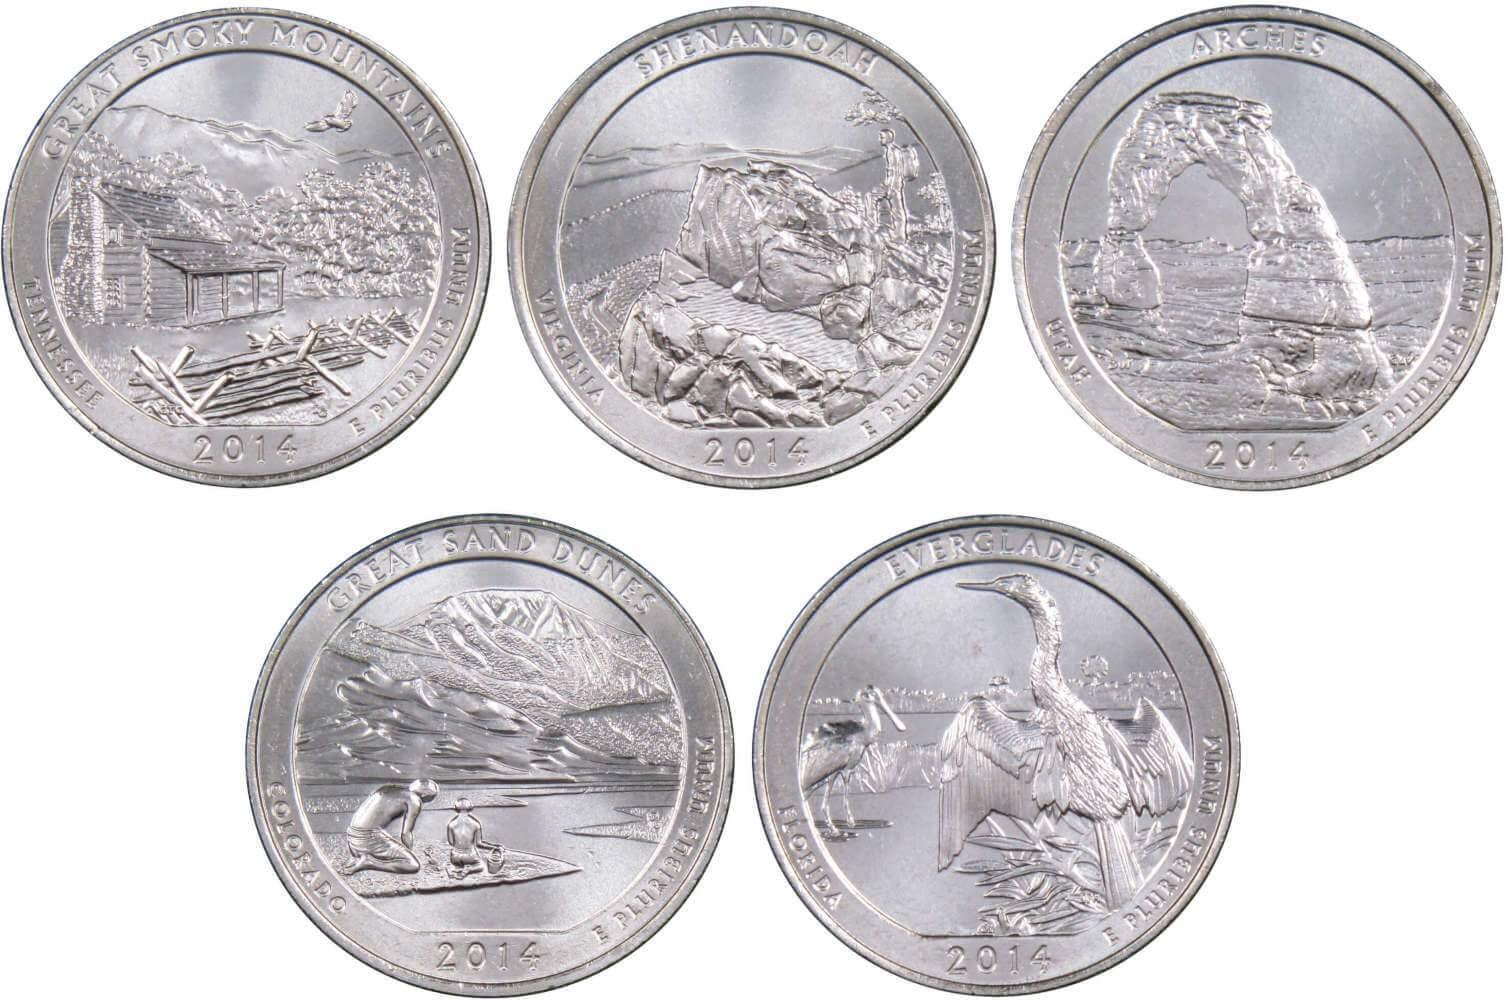 2014 D National Park Quarter 5 Coin Set Uncirculated Mint State 25c Collectible